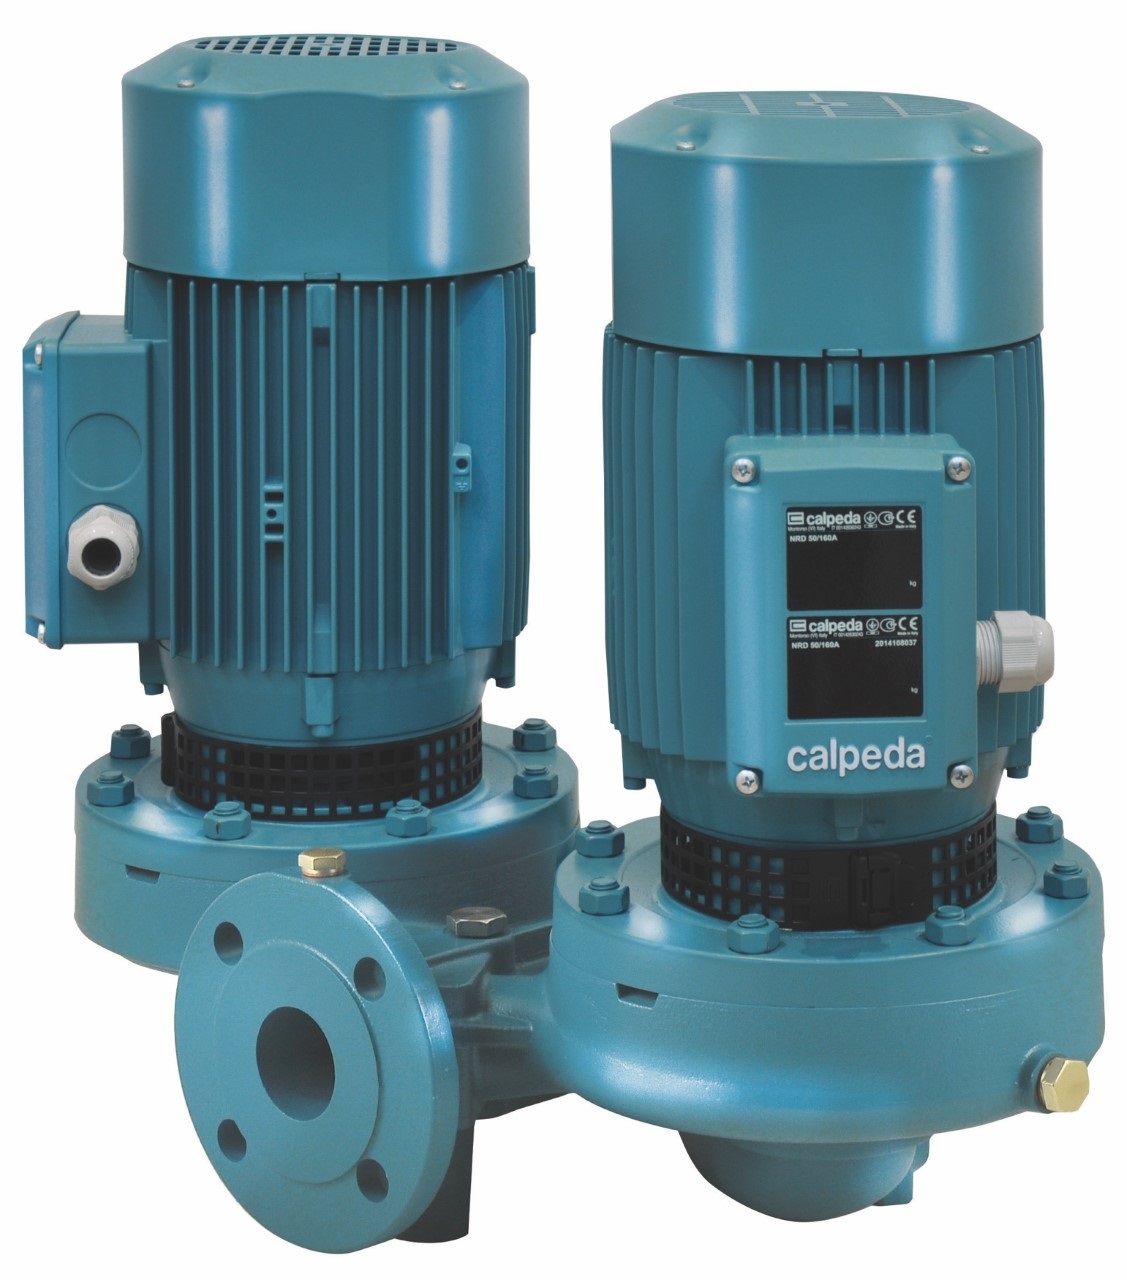 The two new models from Calpeda feature a built-in automatic switching valve for simple single or parallel operation.